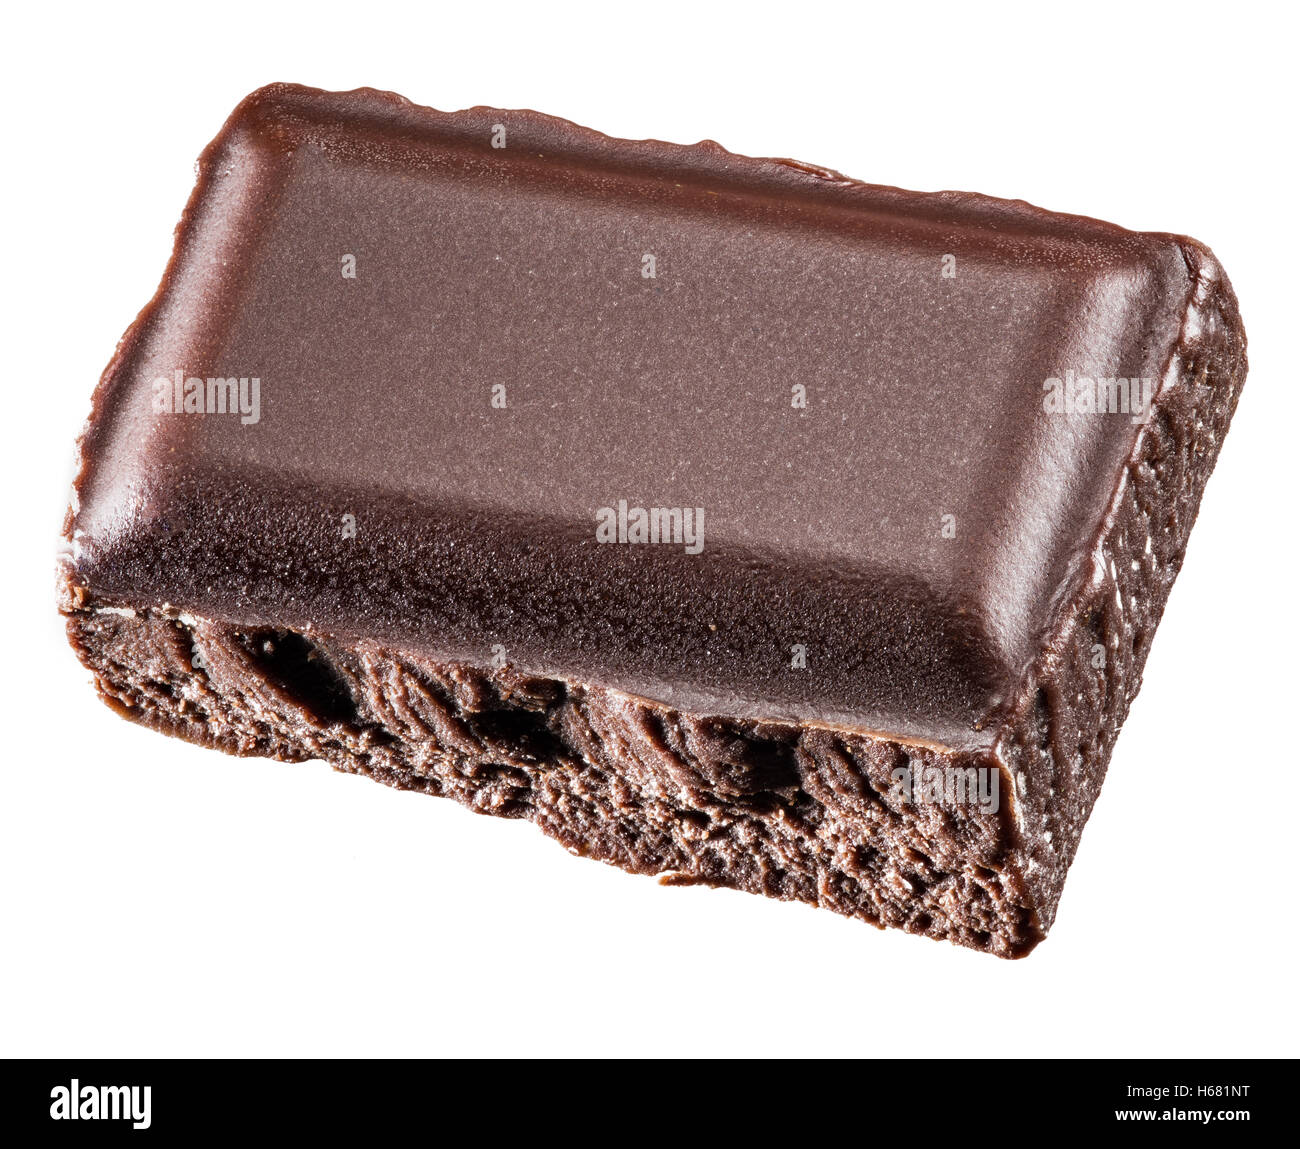 A piece of chocolate bar isolated on a white background. Stock Photo